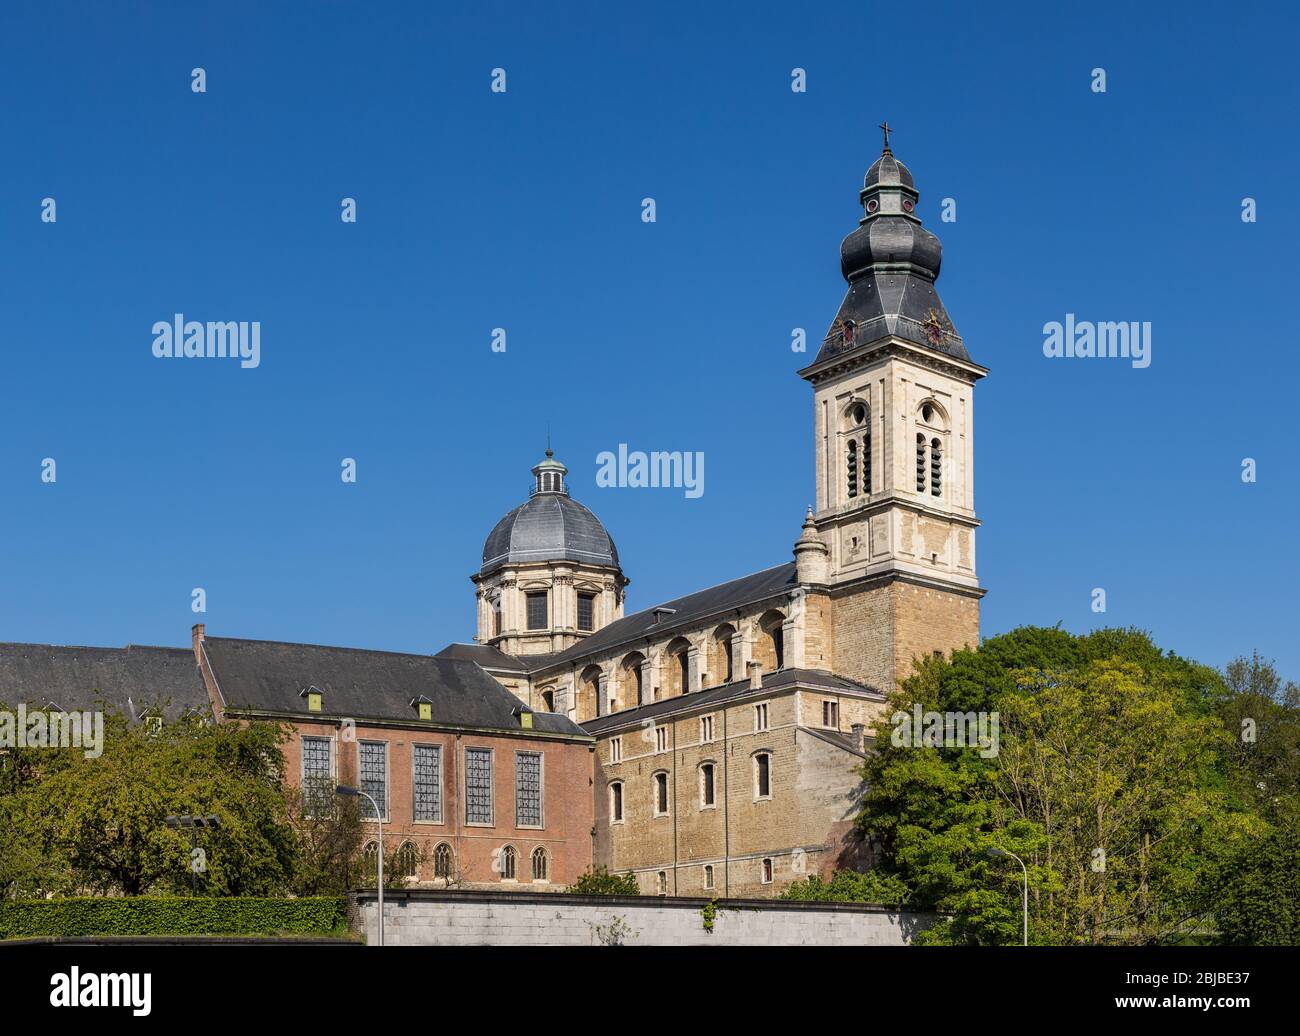 Ghent, Belgium - April 26, 2020: The Sint Pieterskerk or Our Lady of Saint Peter Church seen from behind Stock Photo